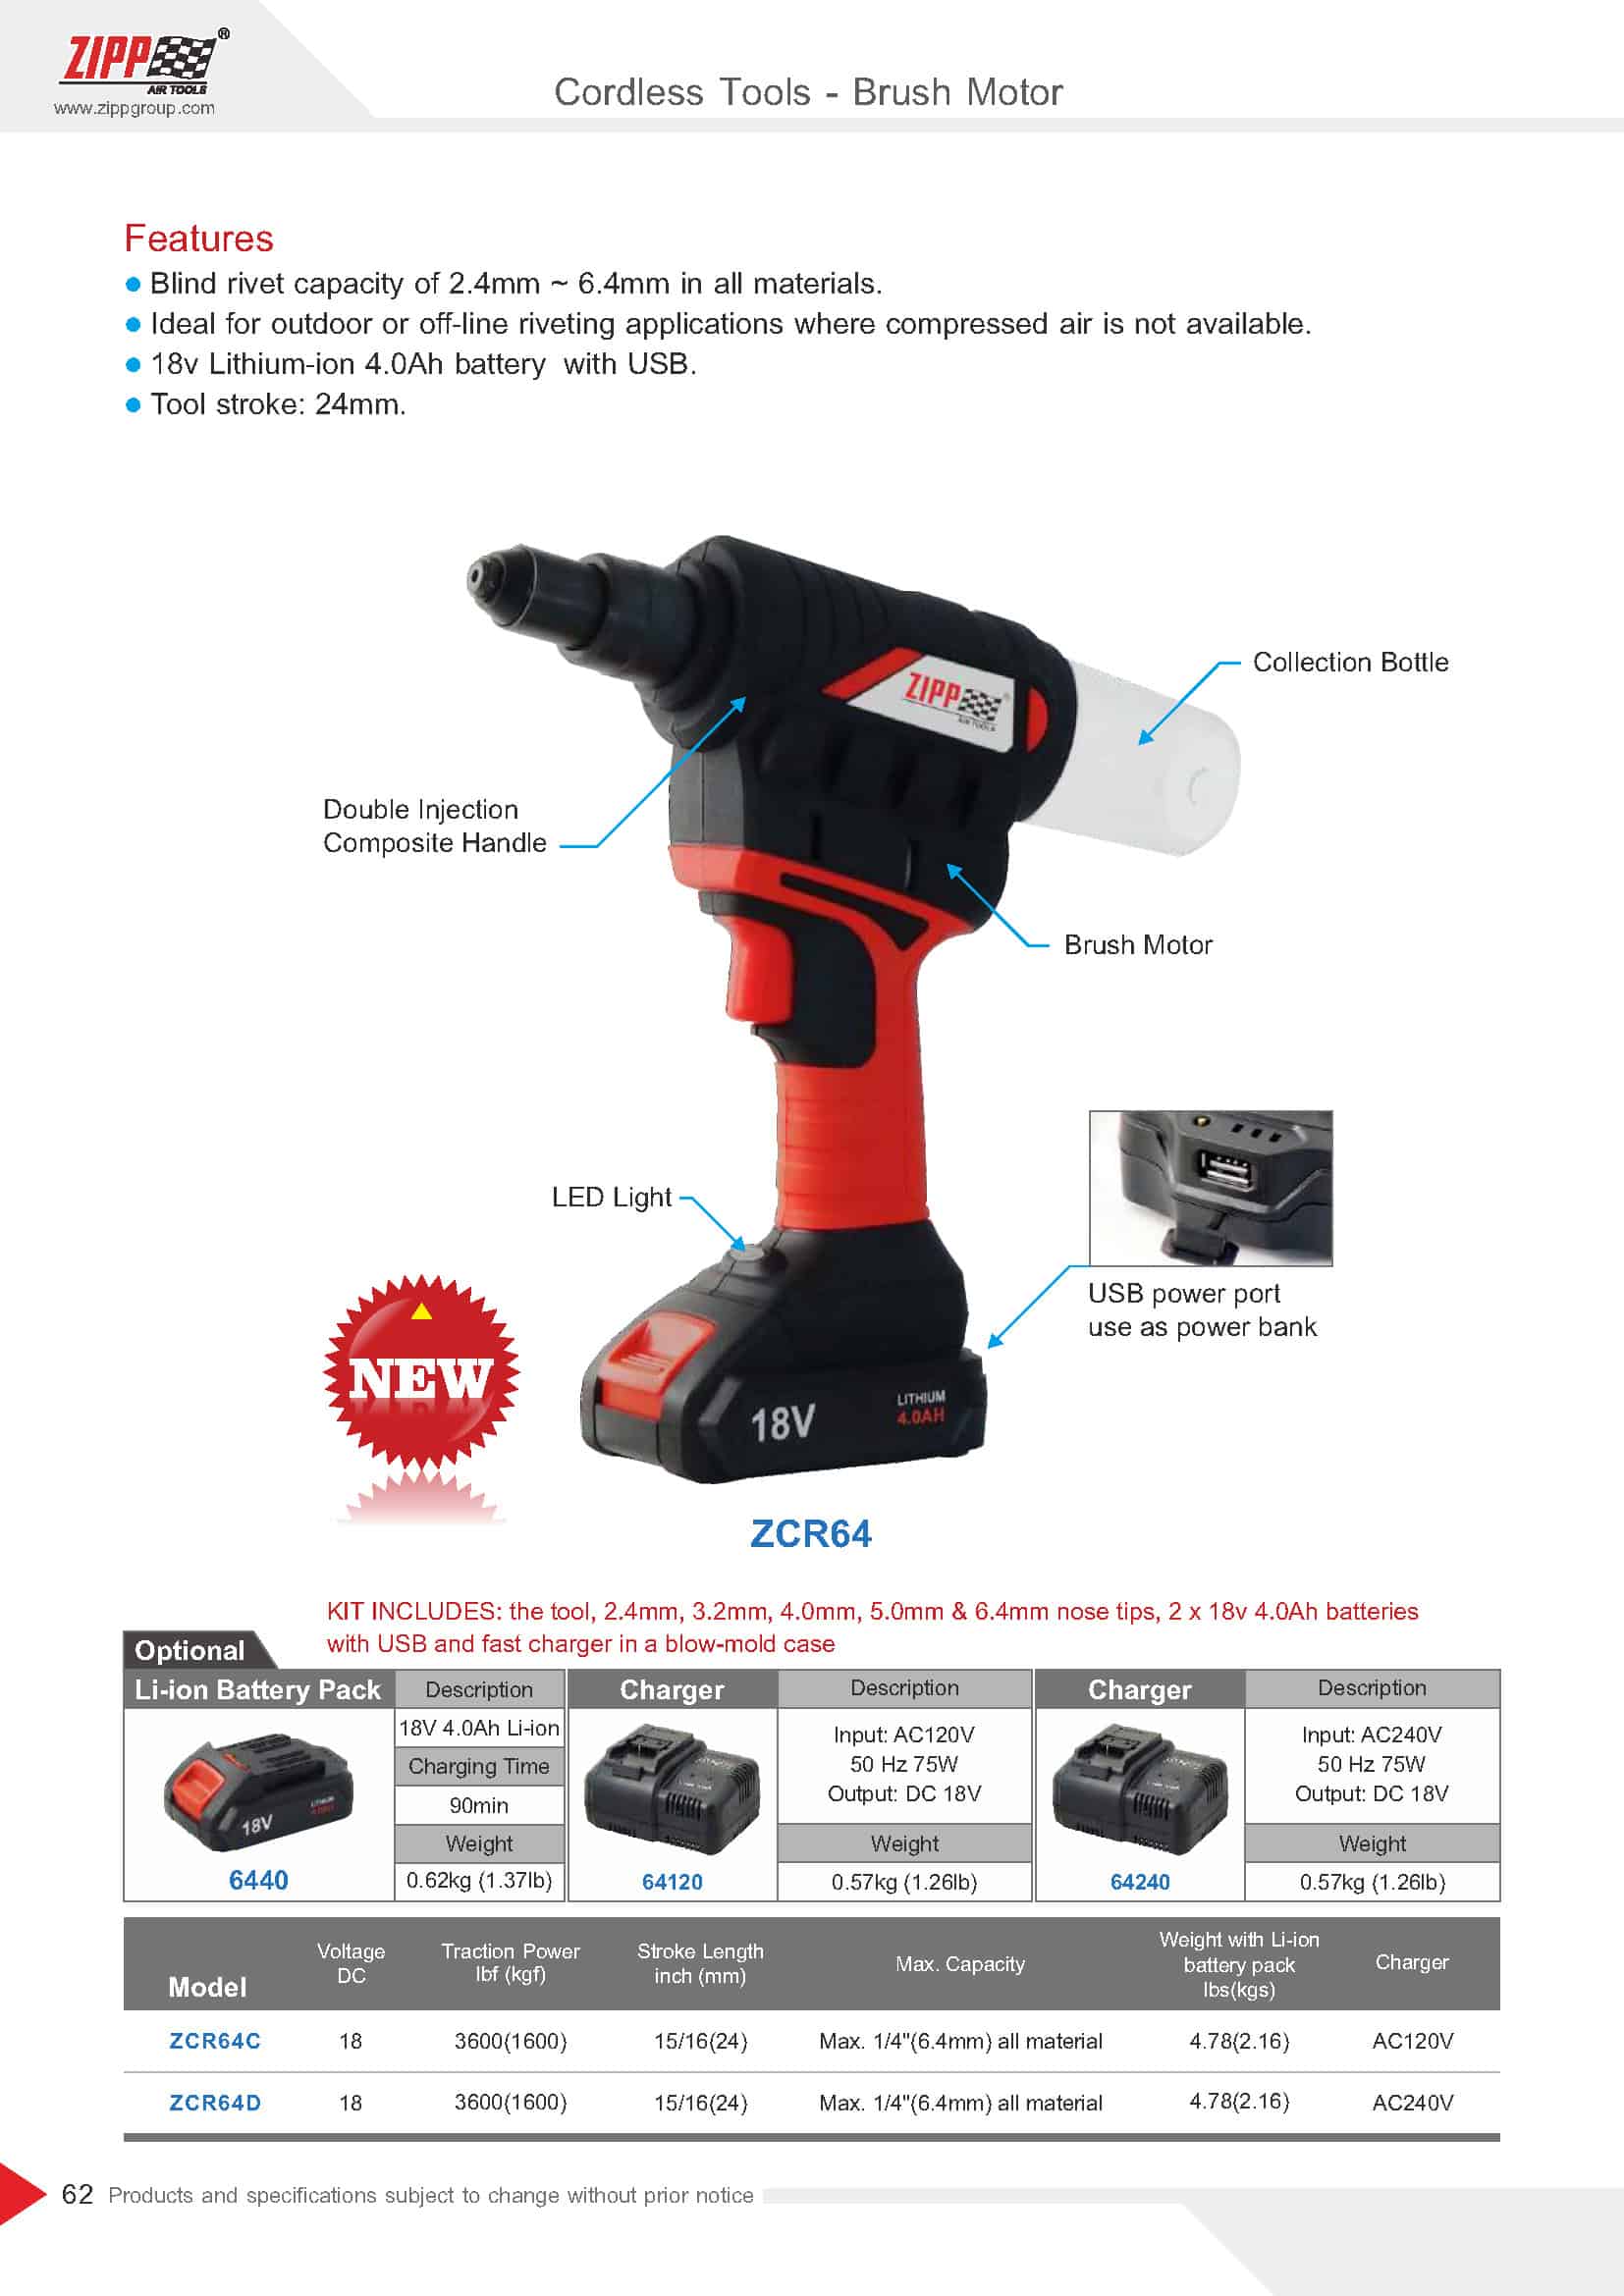 new cordless blind riveter available now